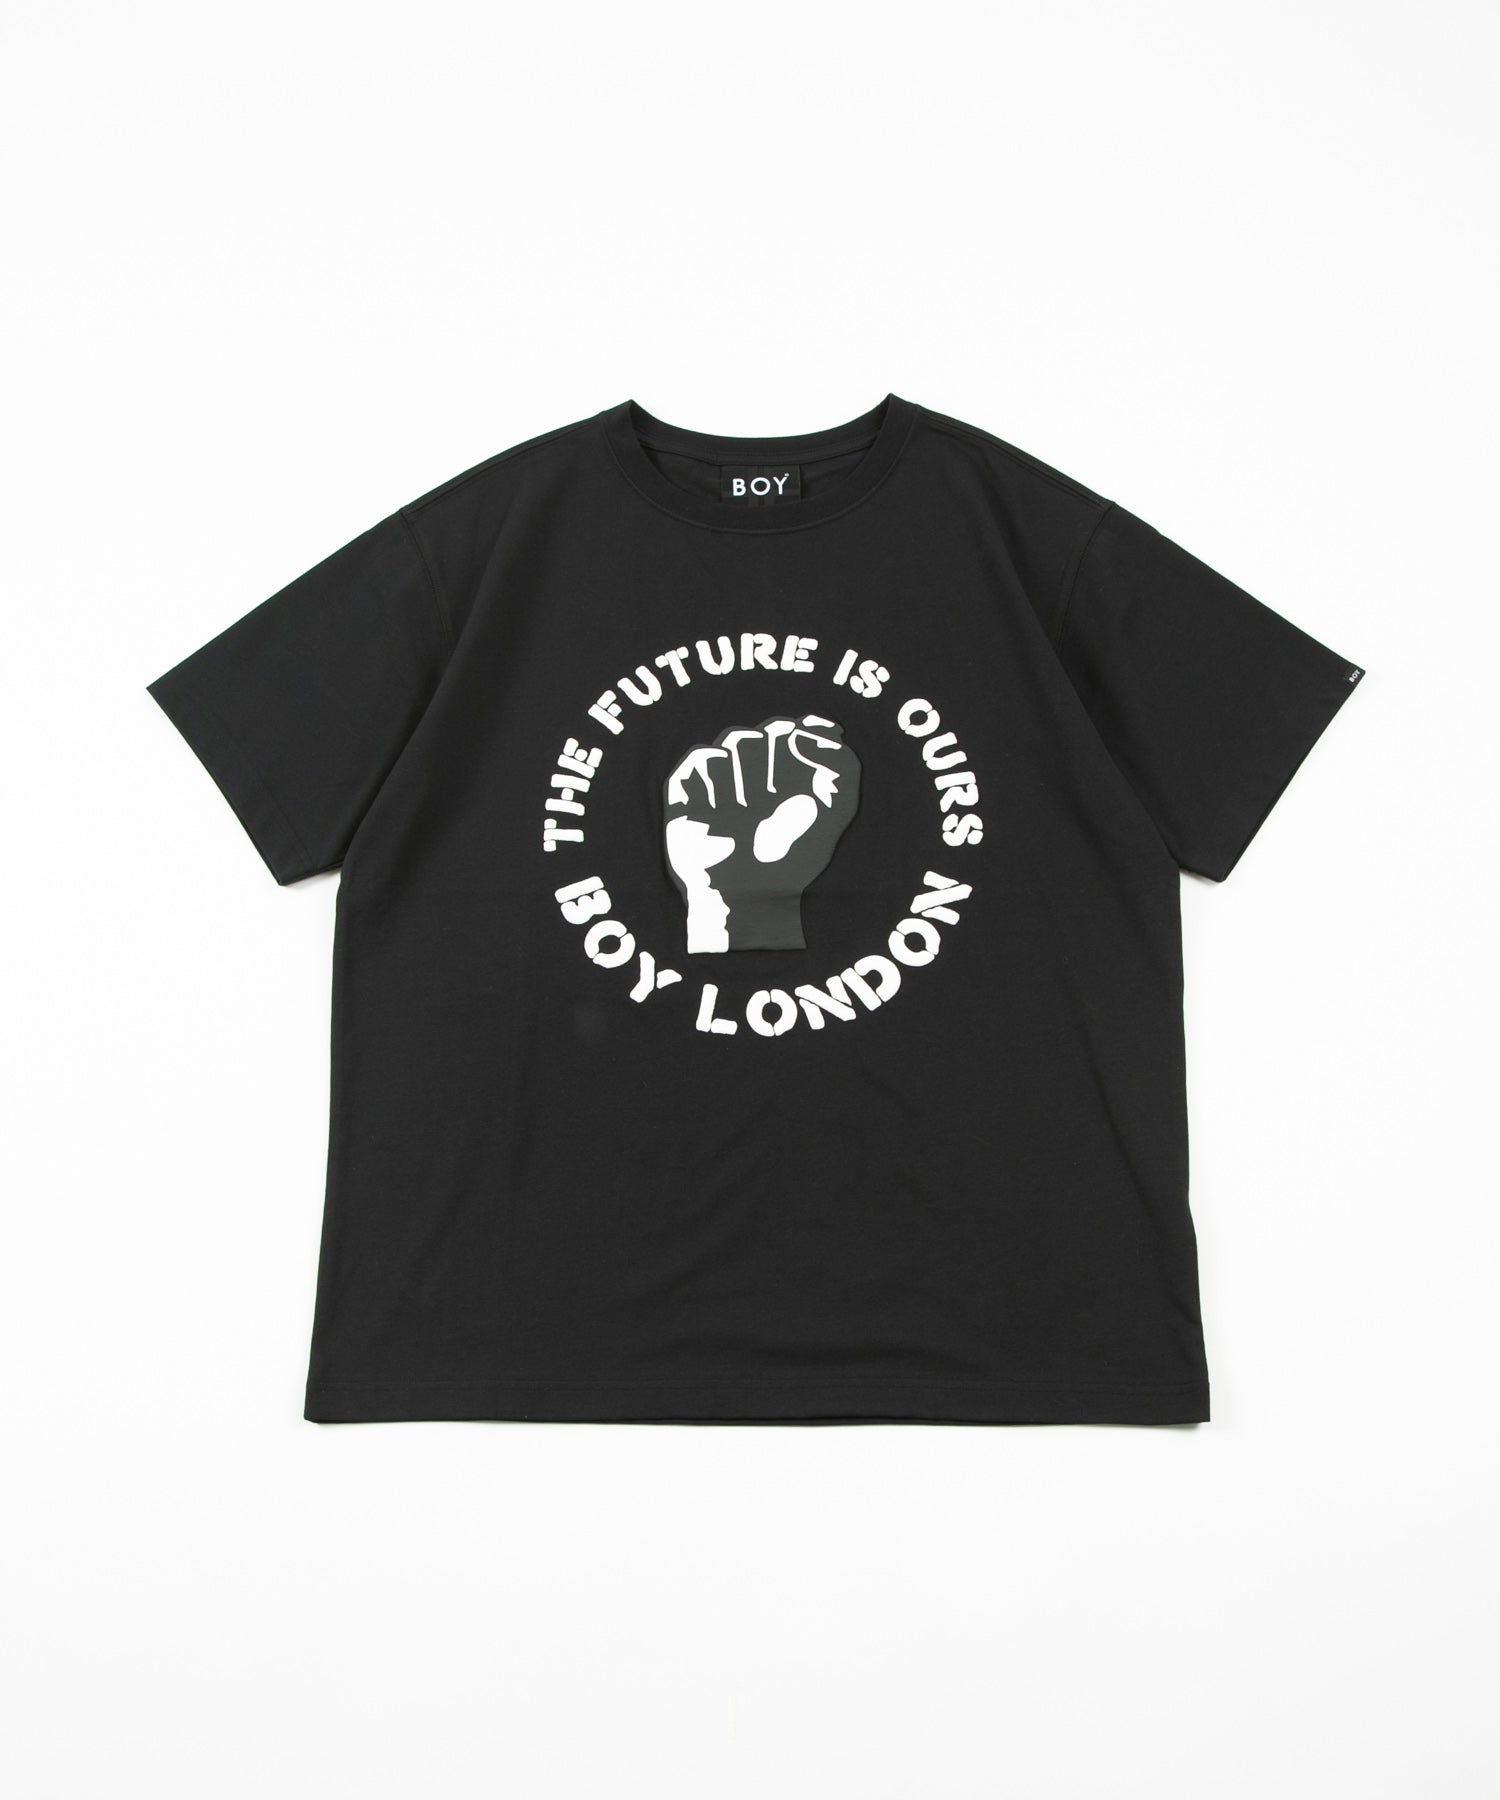 THE FUTURE IS OURS」 TEE BLACK【AFJ-T230302】 – BOY LONDON